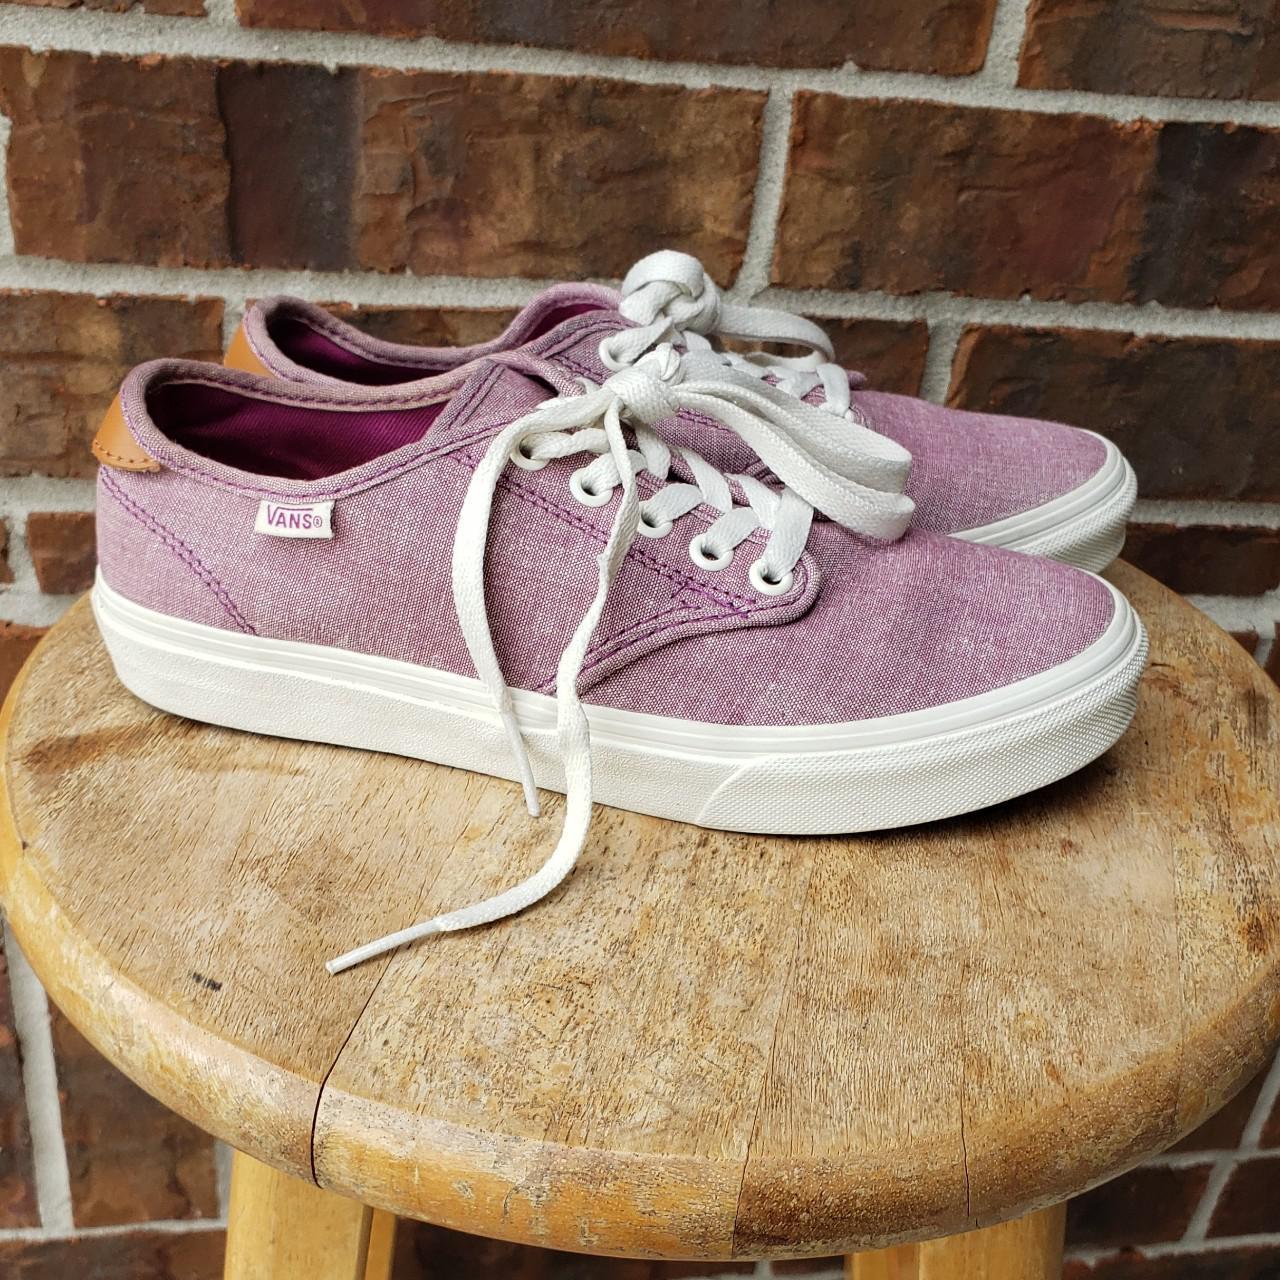 Product Image 1 - Vans Low Tops

♤ purple lowtops